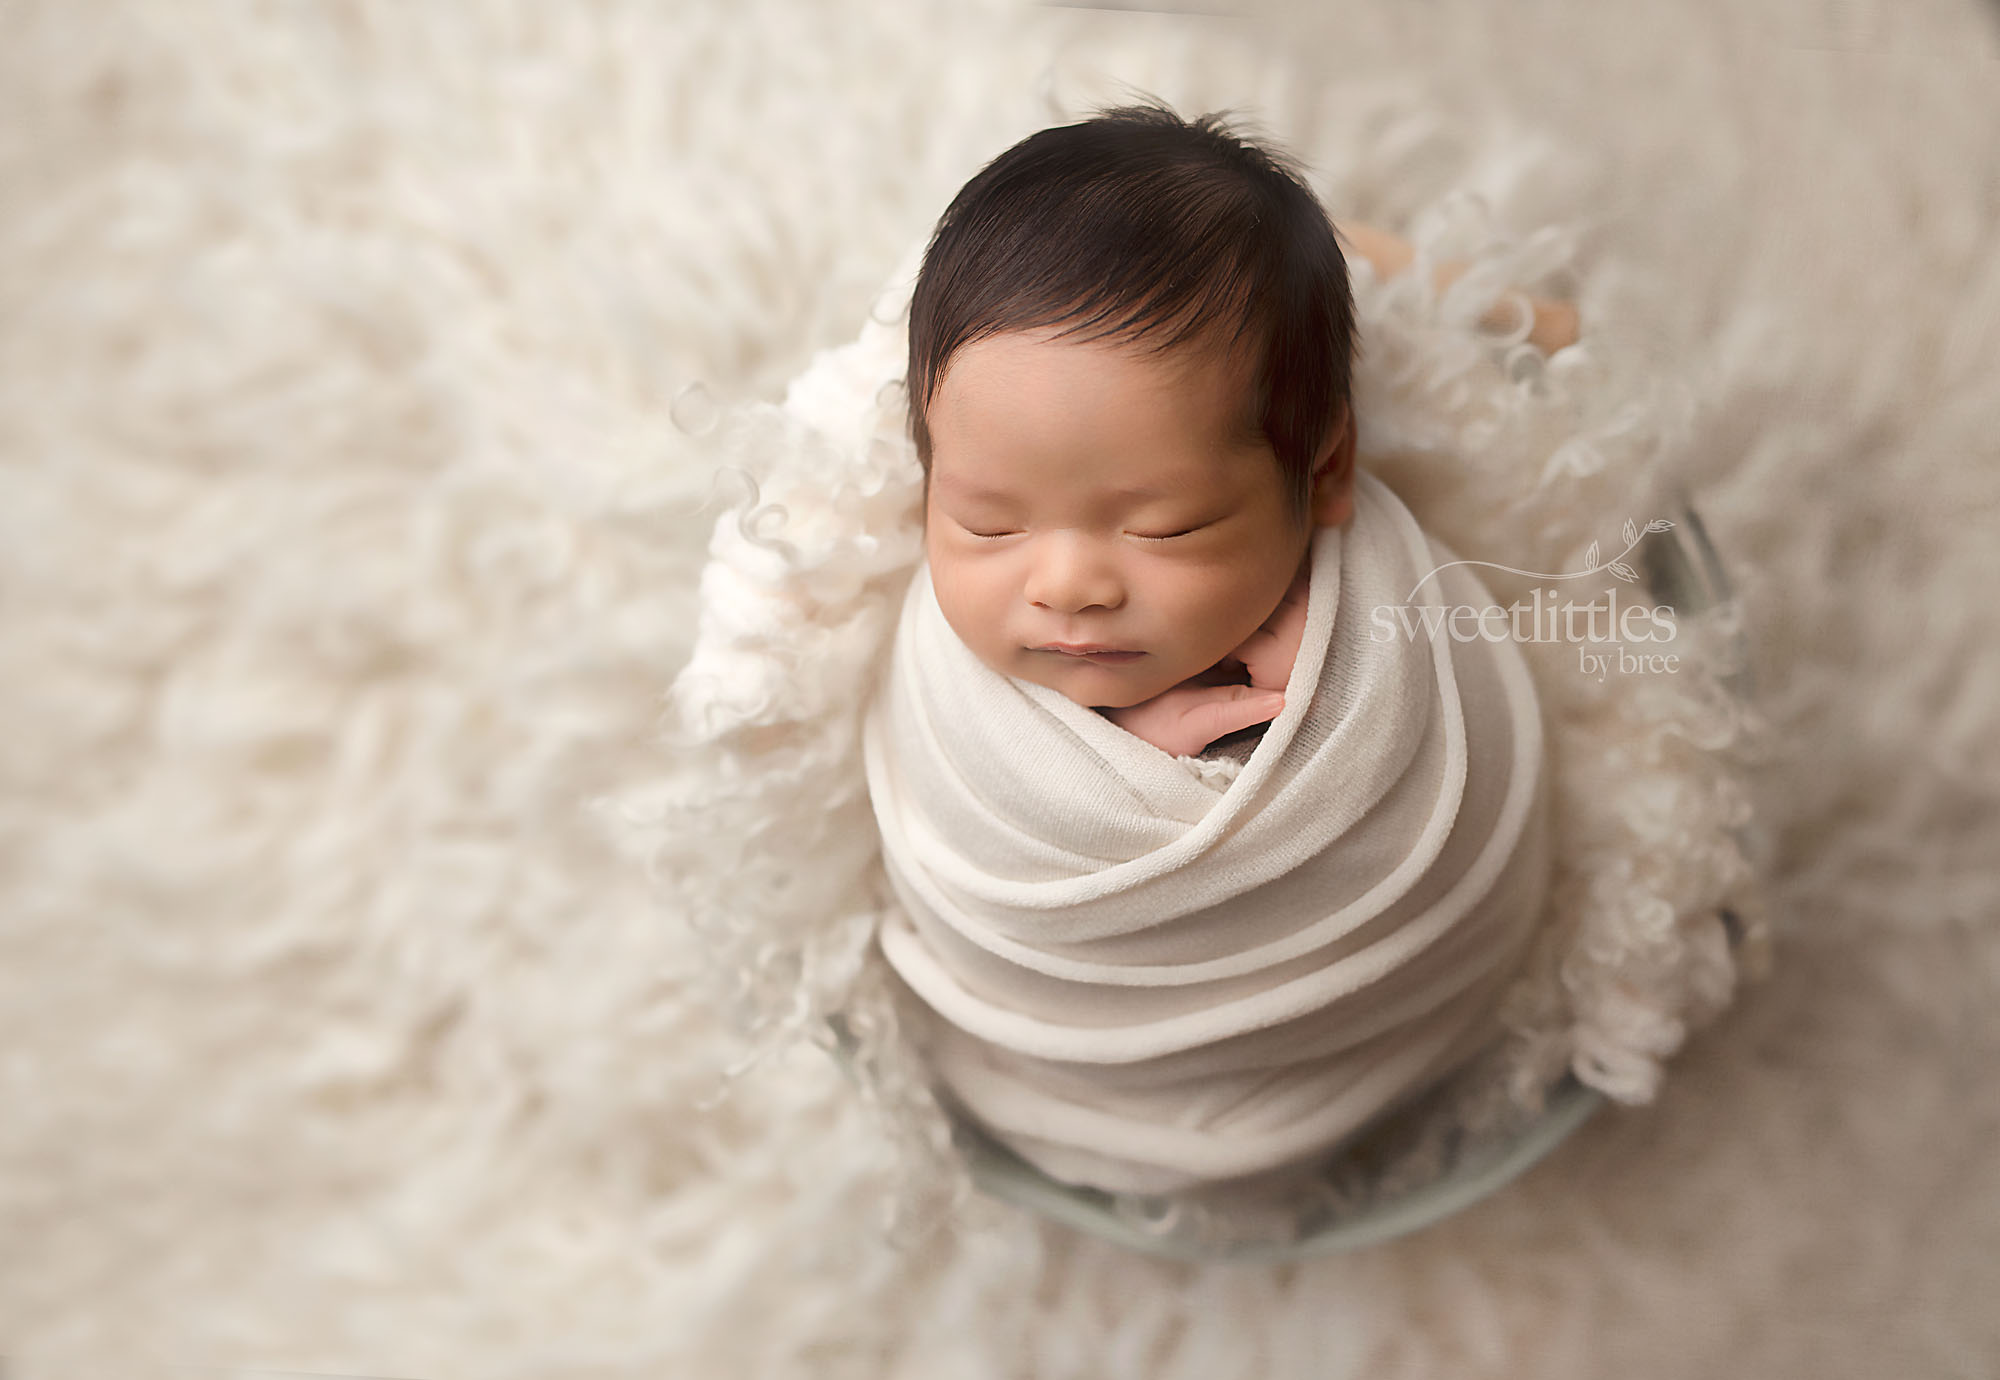 sweet littles small gallery 3 - Newborn Sessions